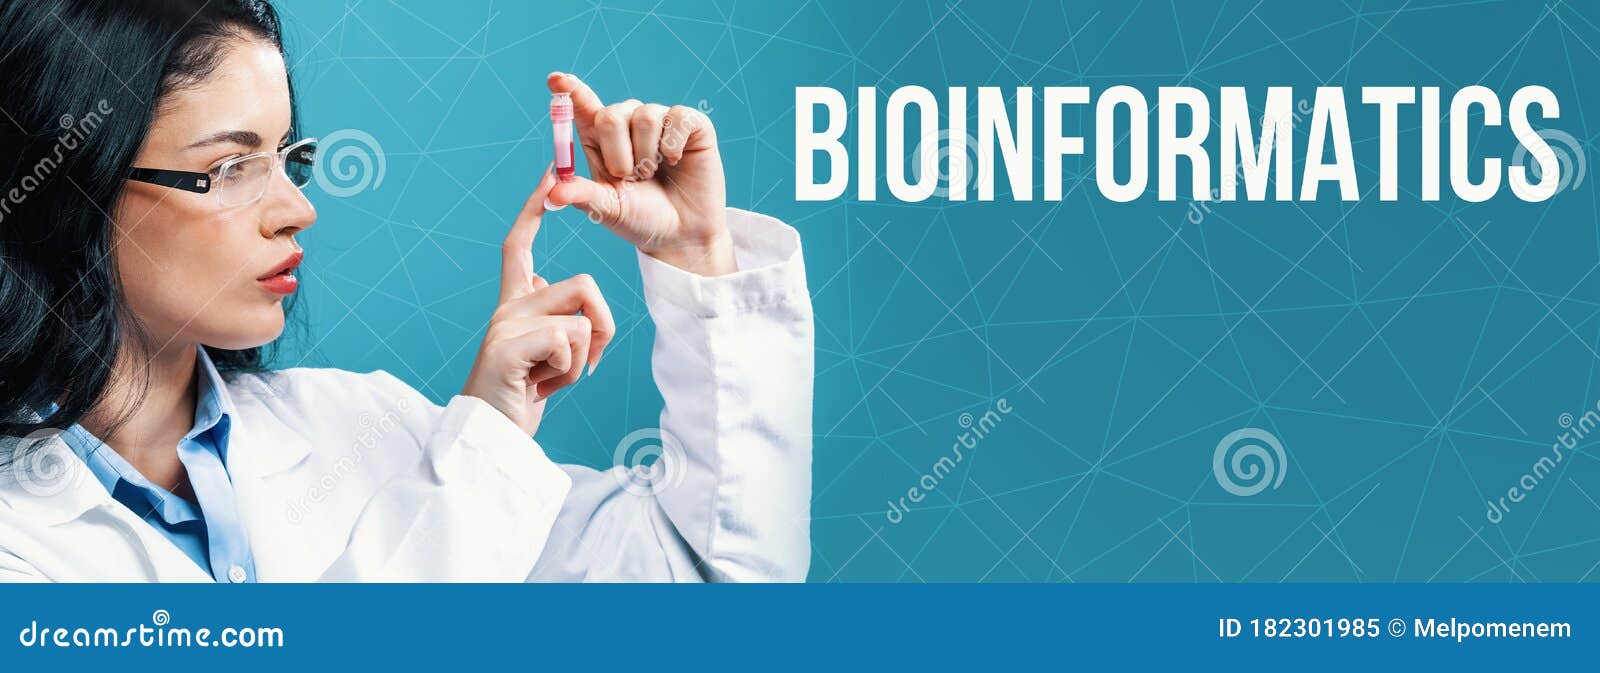 bioinformatics theme with a doctor holding a laboratory vial